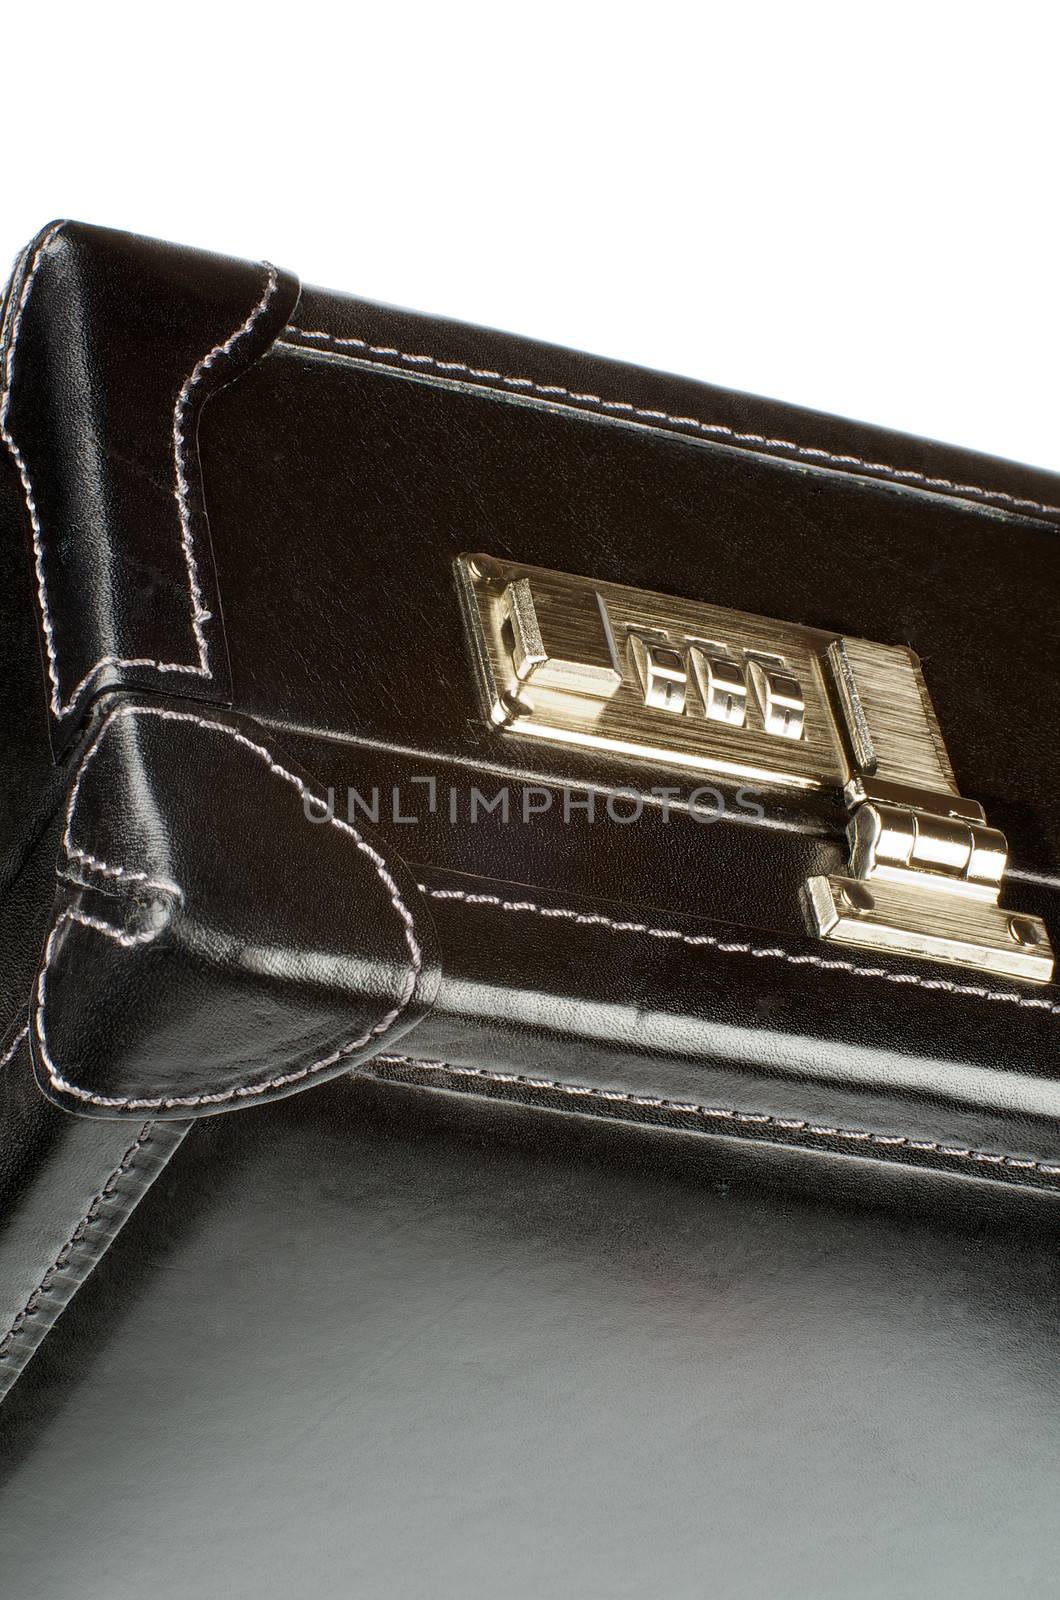 Details of Black Leather Briefcase with Gold Key Lock closeup on white background